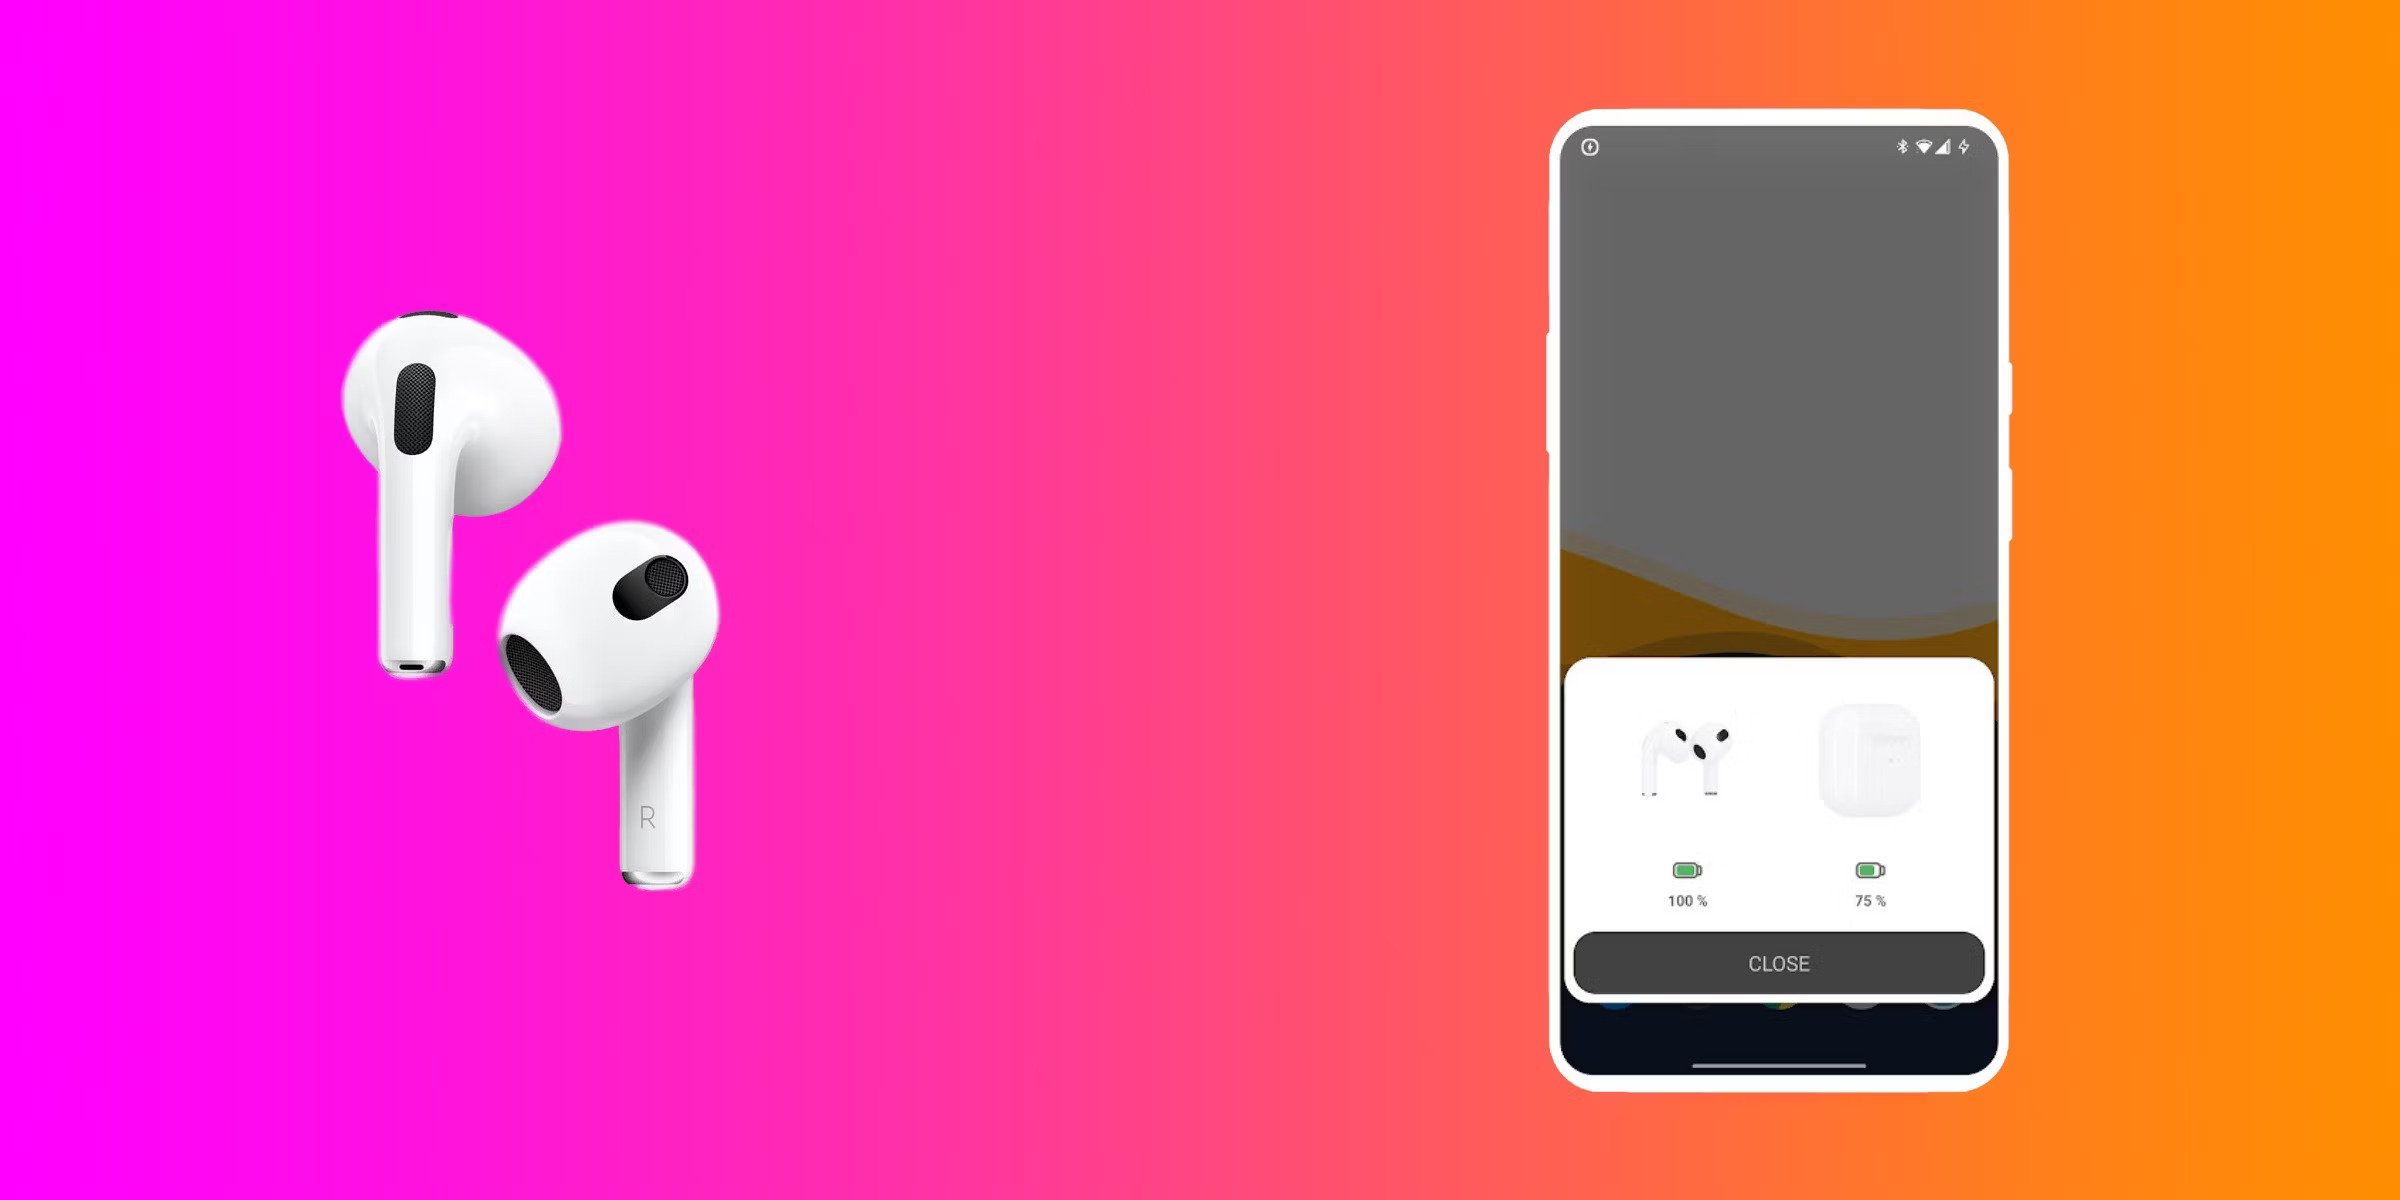 How To Turn Off Noise Cancellation On Airpods Pro On Android